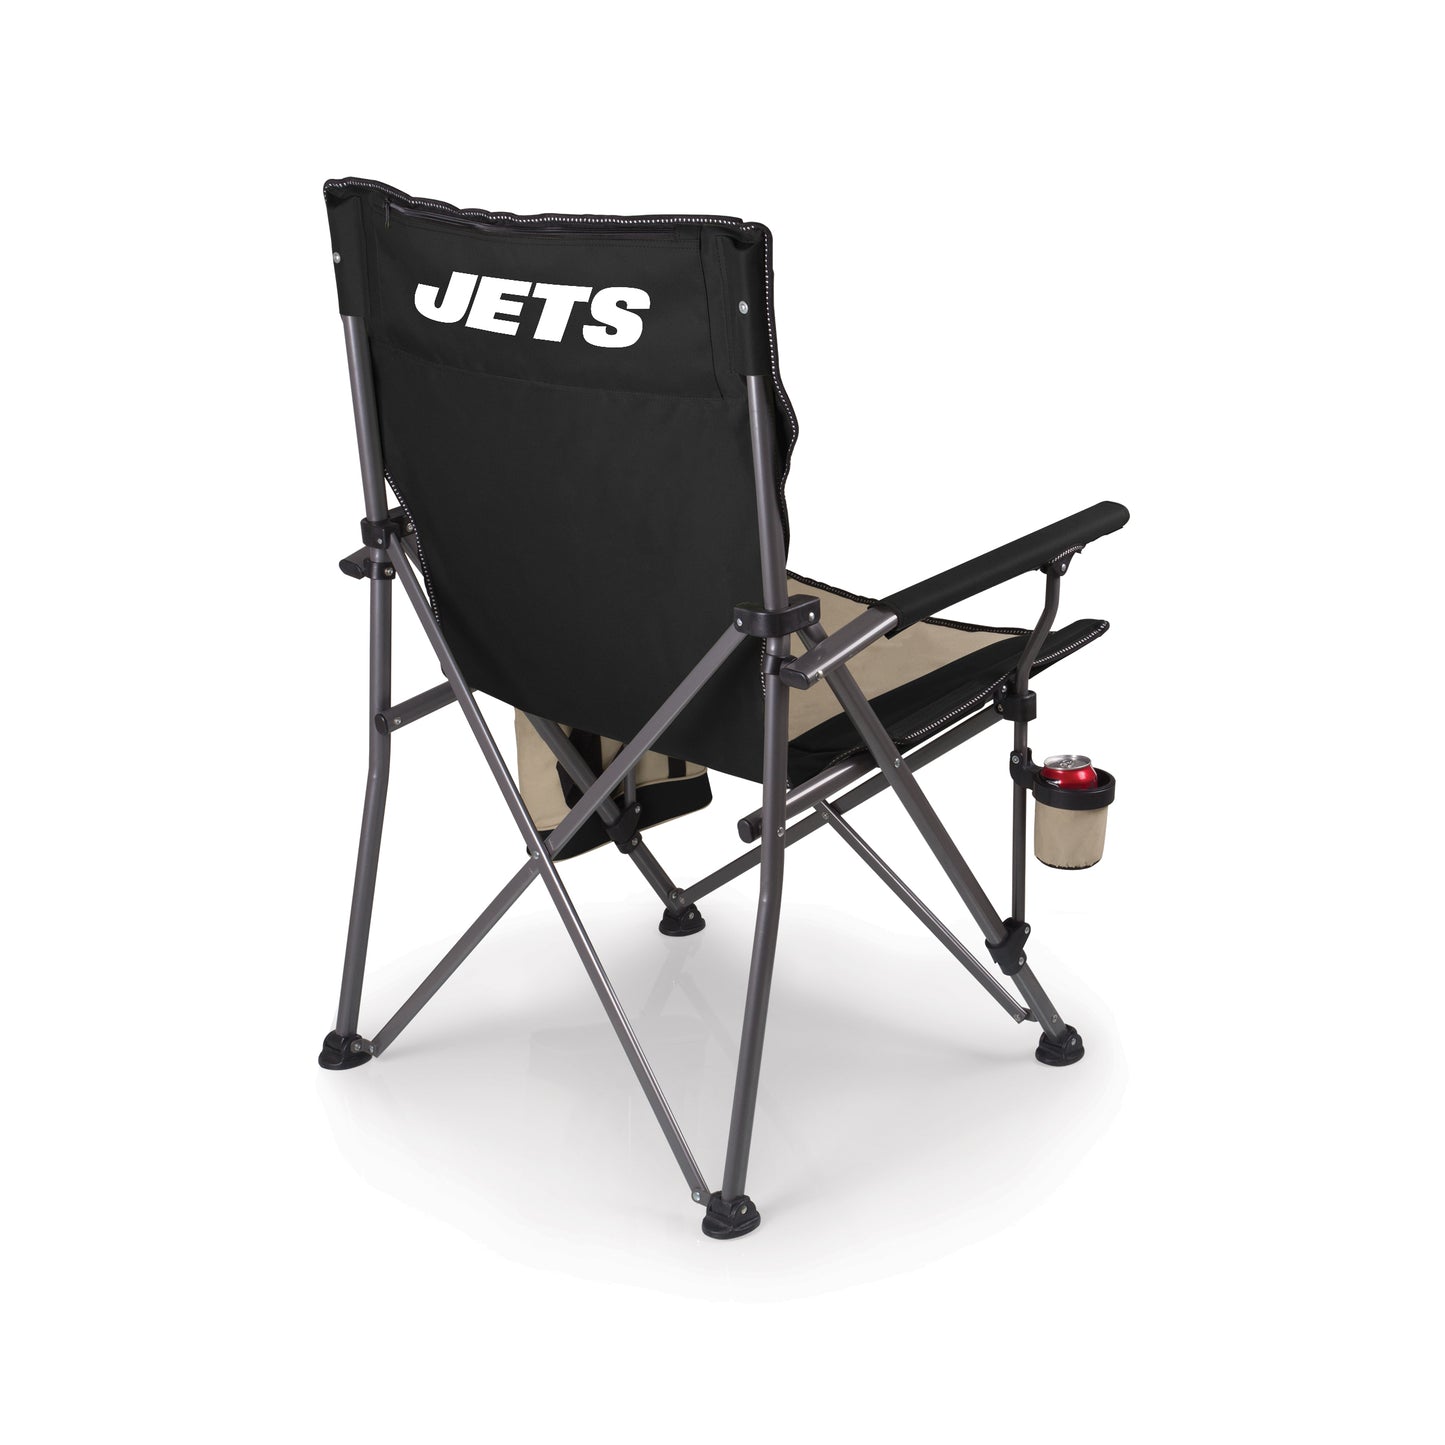 New York Jets - Big Bear XL Camp Chair with Cooler